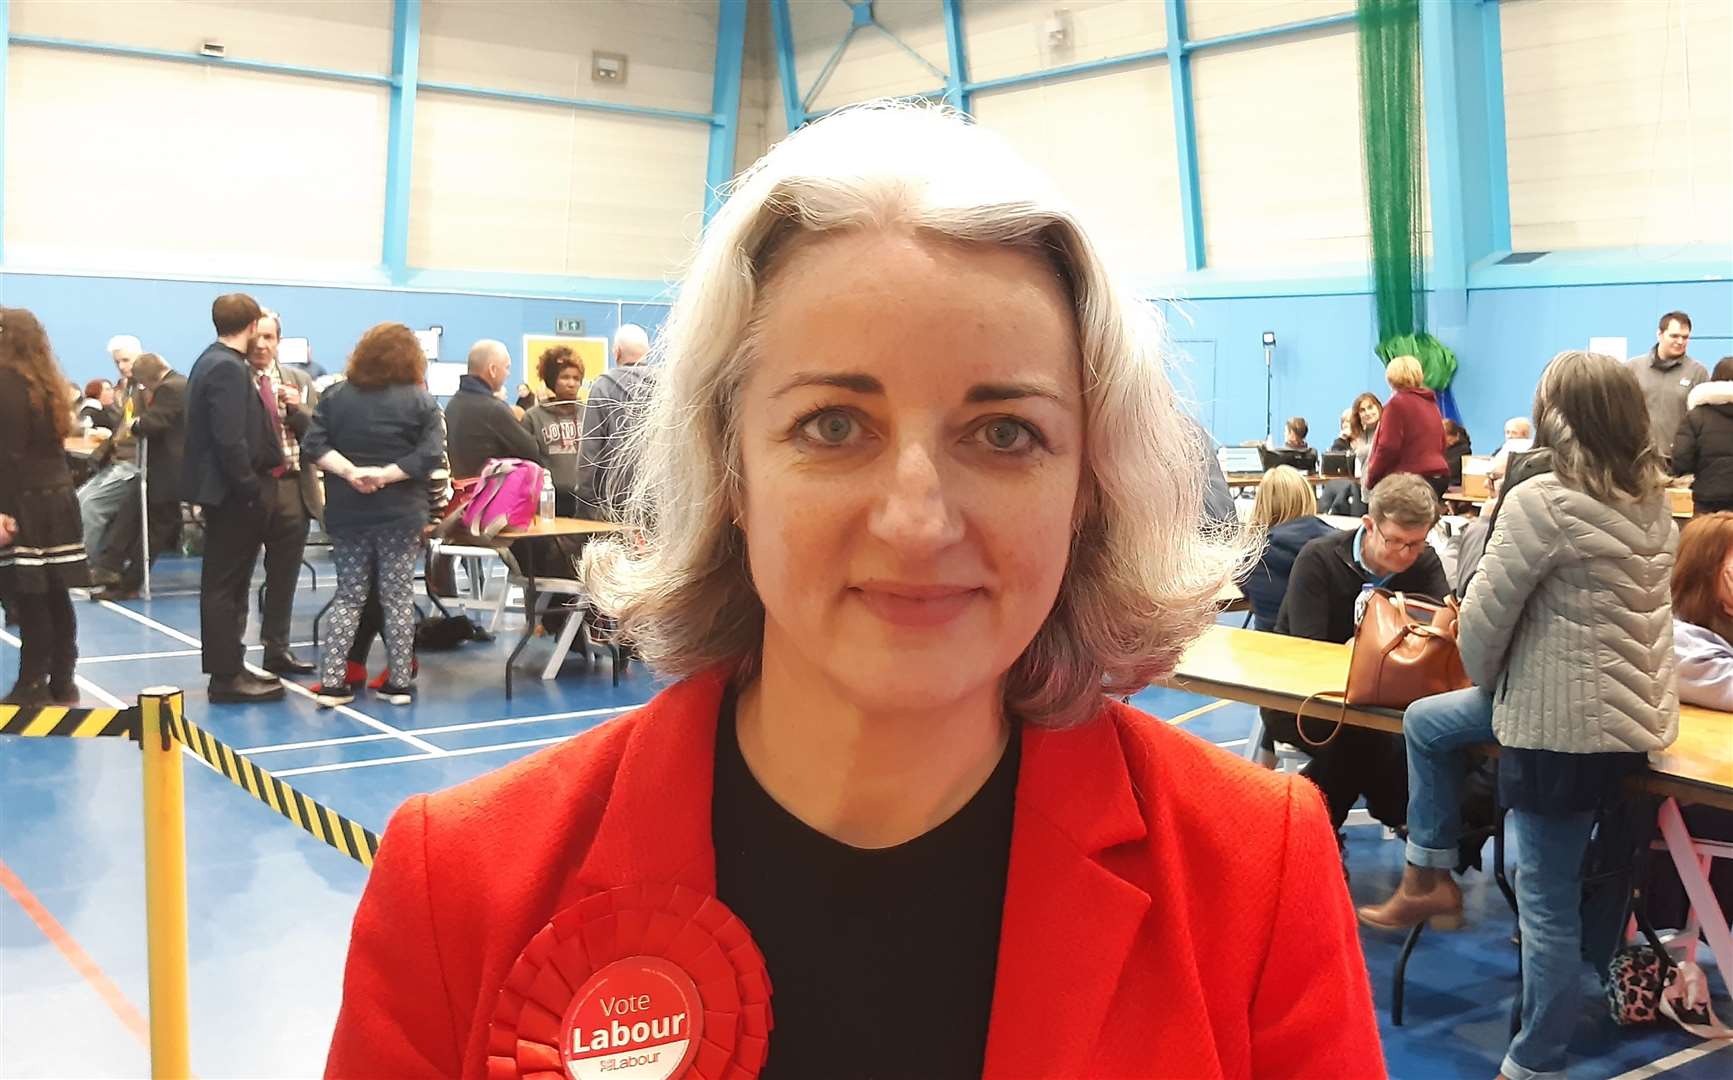 Rebecca Gordon-Nesbitt was disappointed with Labour's performance across the country